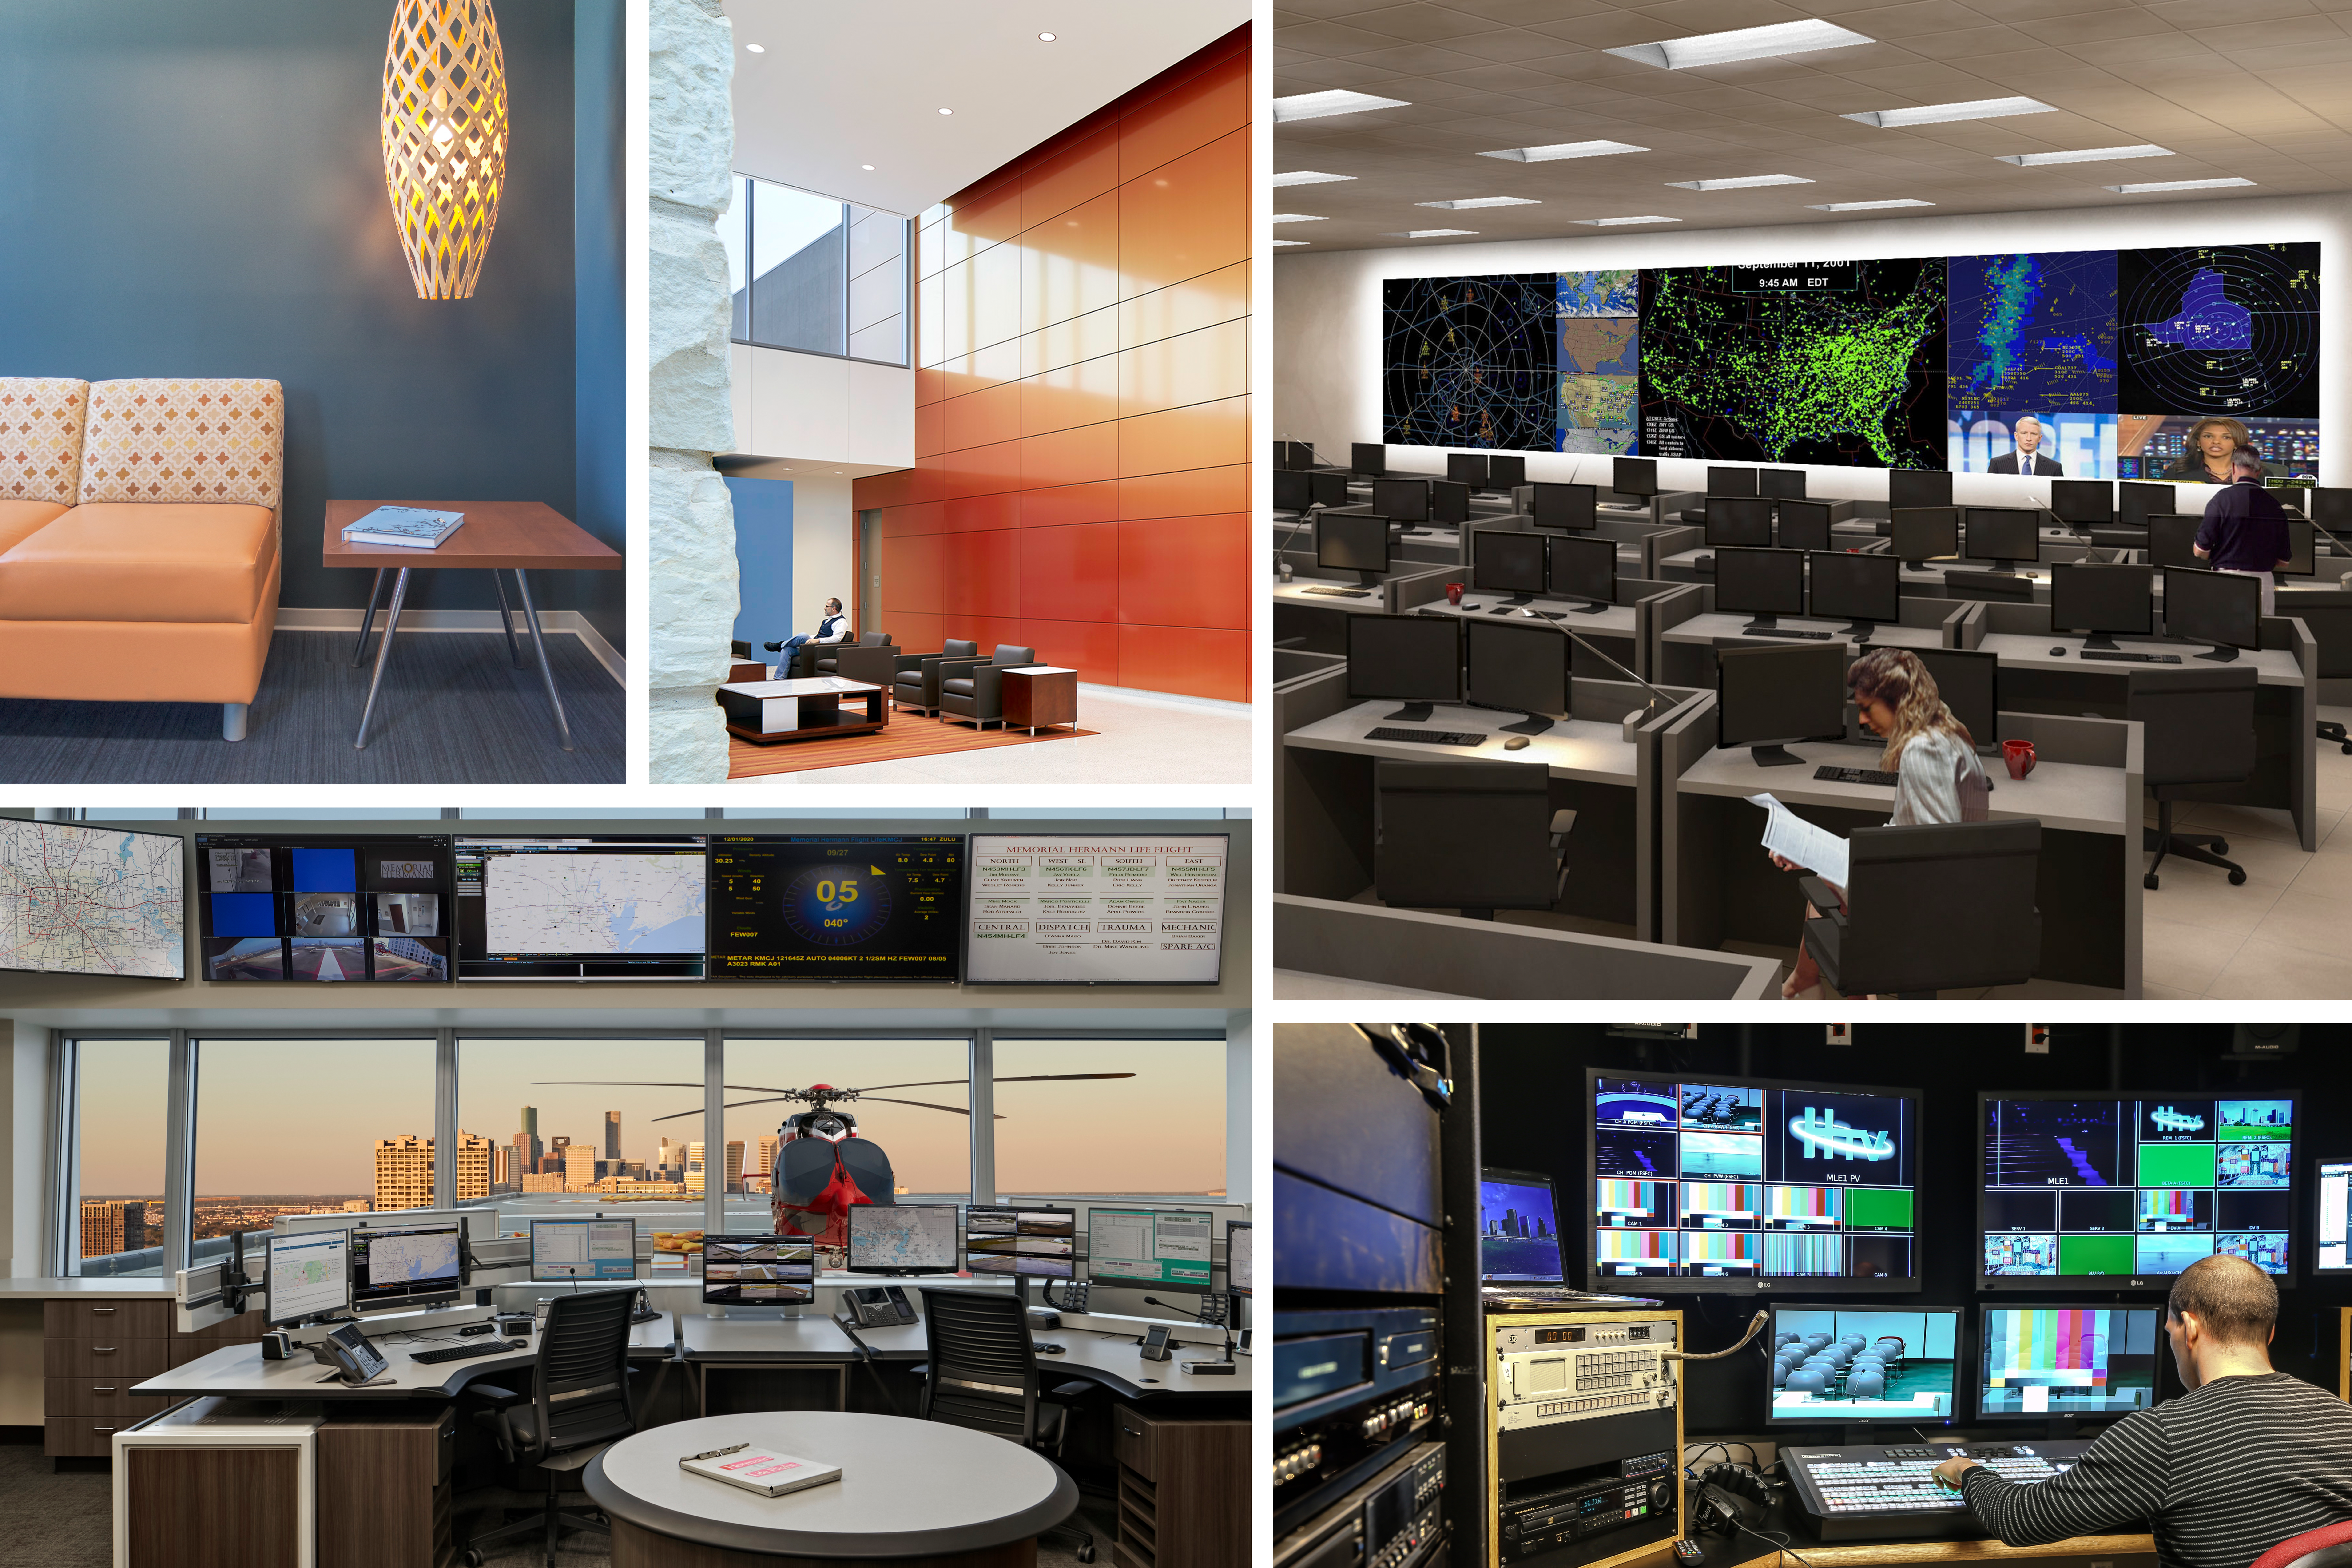 5 Images: 3 of control rooms with many large screen and 2 of support areas